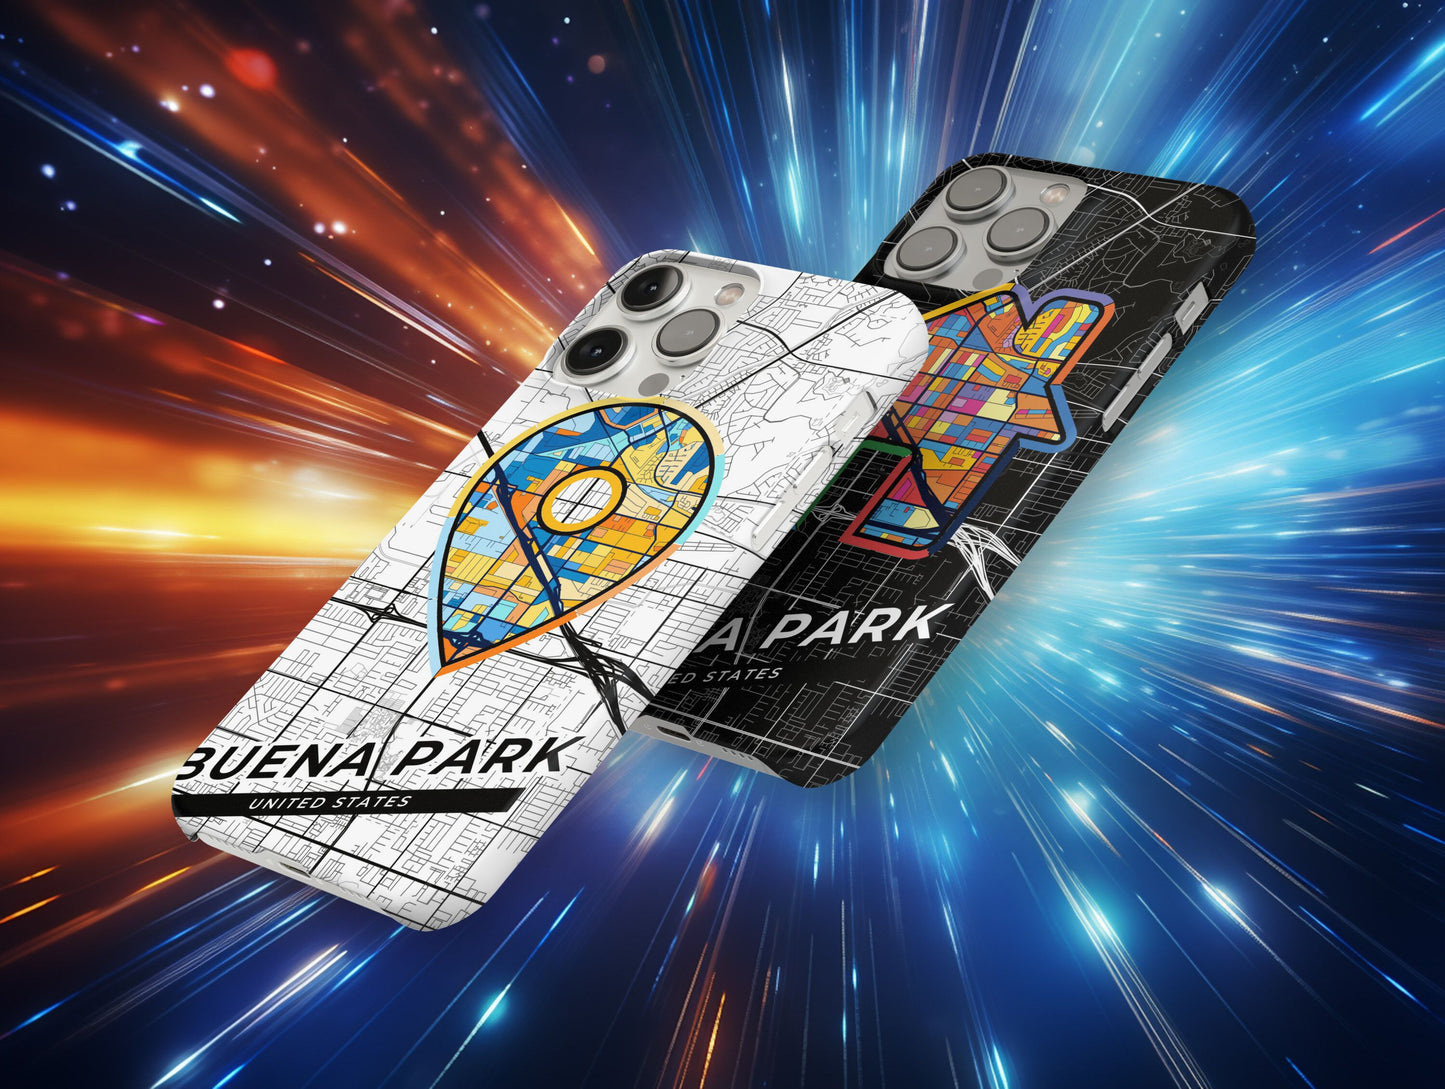 Buena Park California slim phone case with colorful icon. Birthday, wedding or housewarming gift. Couple match cases.